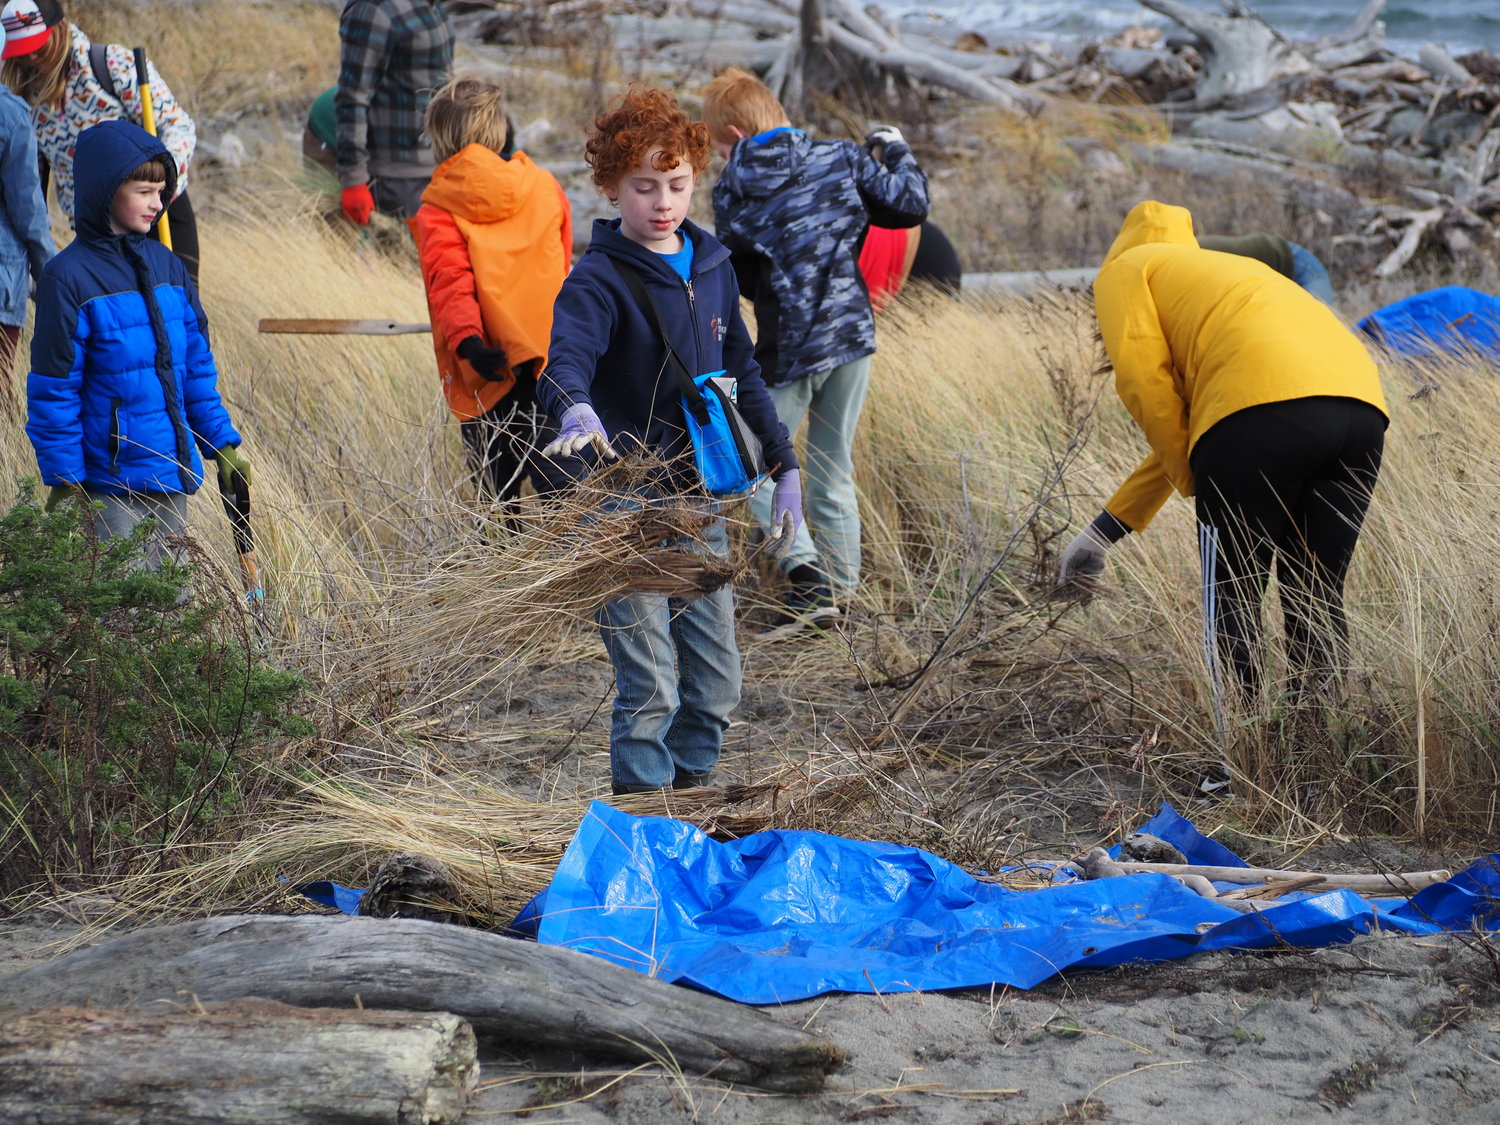 Theo Weeks, 10, drops off a load of invasive European beach grass he helped remove from Fort Worden’s beaches alongside his fellow Cub Scouts of Pack 4479